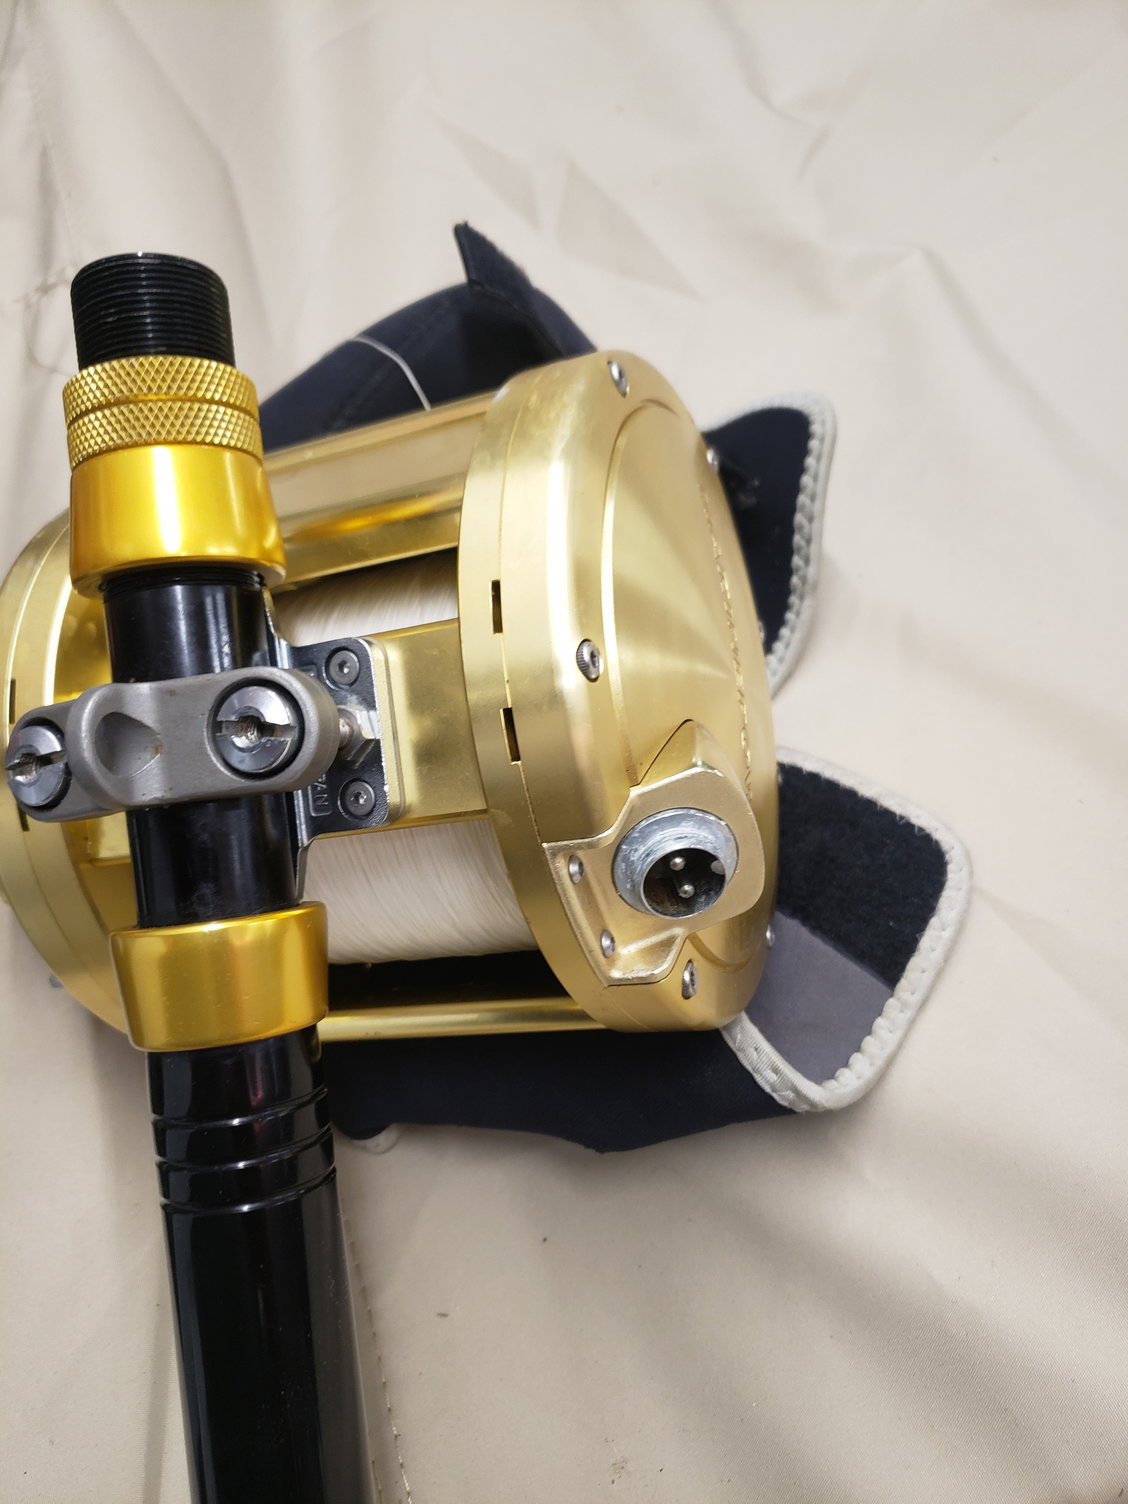 Kristal electric reel plugs - The Hull Truth - Boating and Fishing Forum